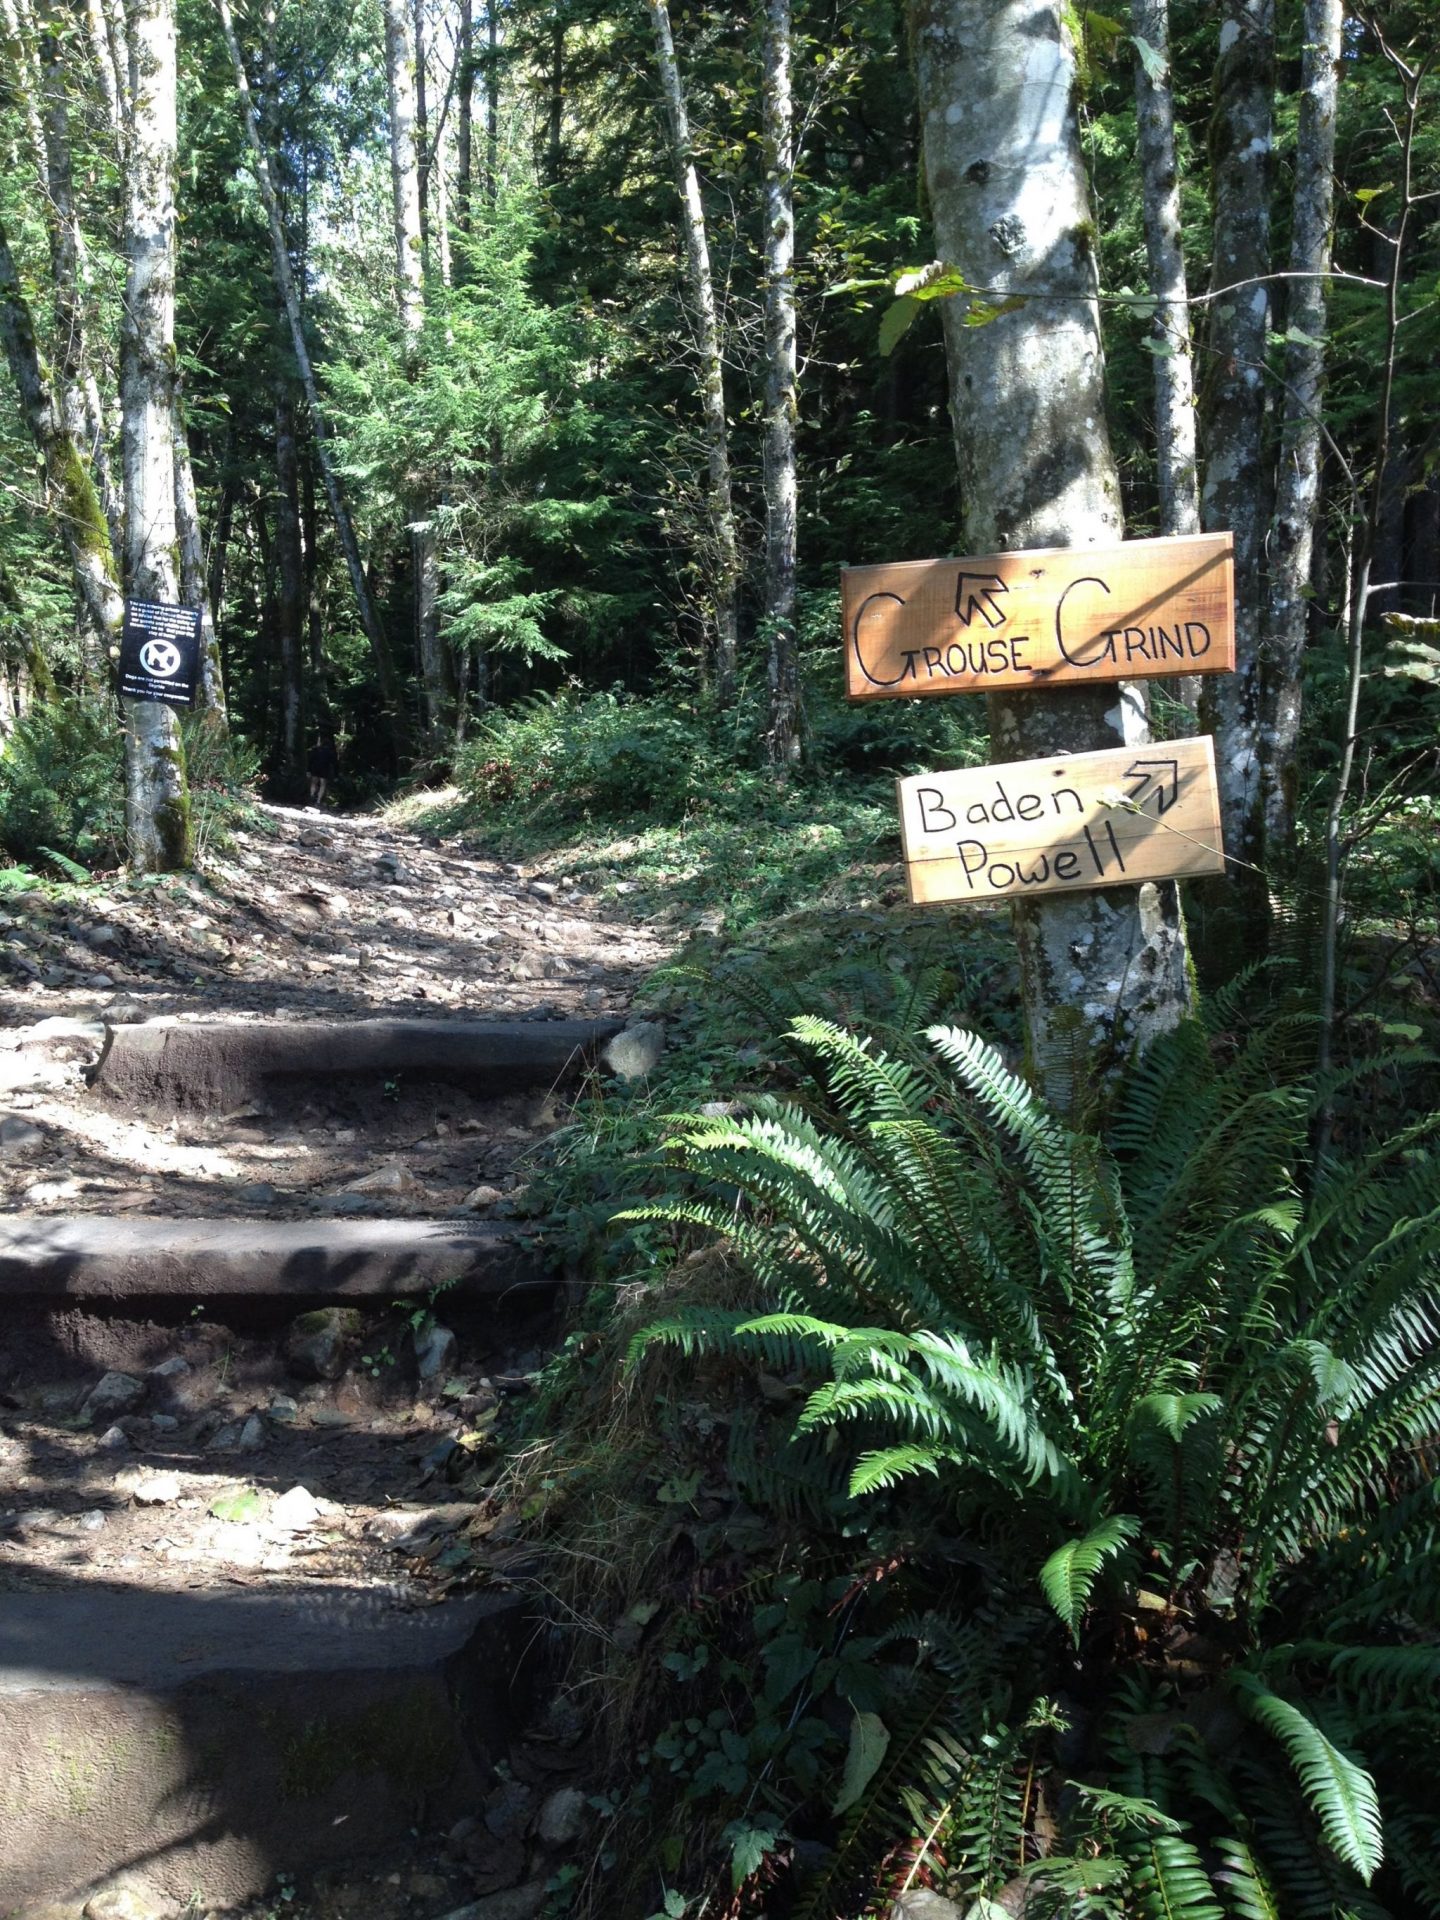 Starting the Grouse Grind, Vancouver